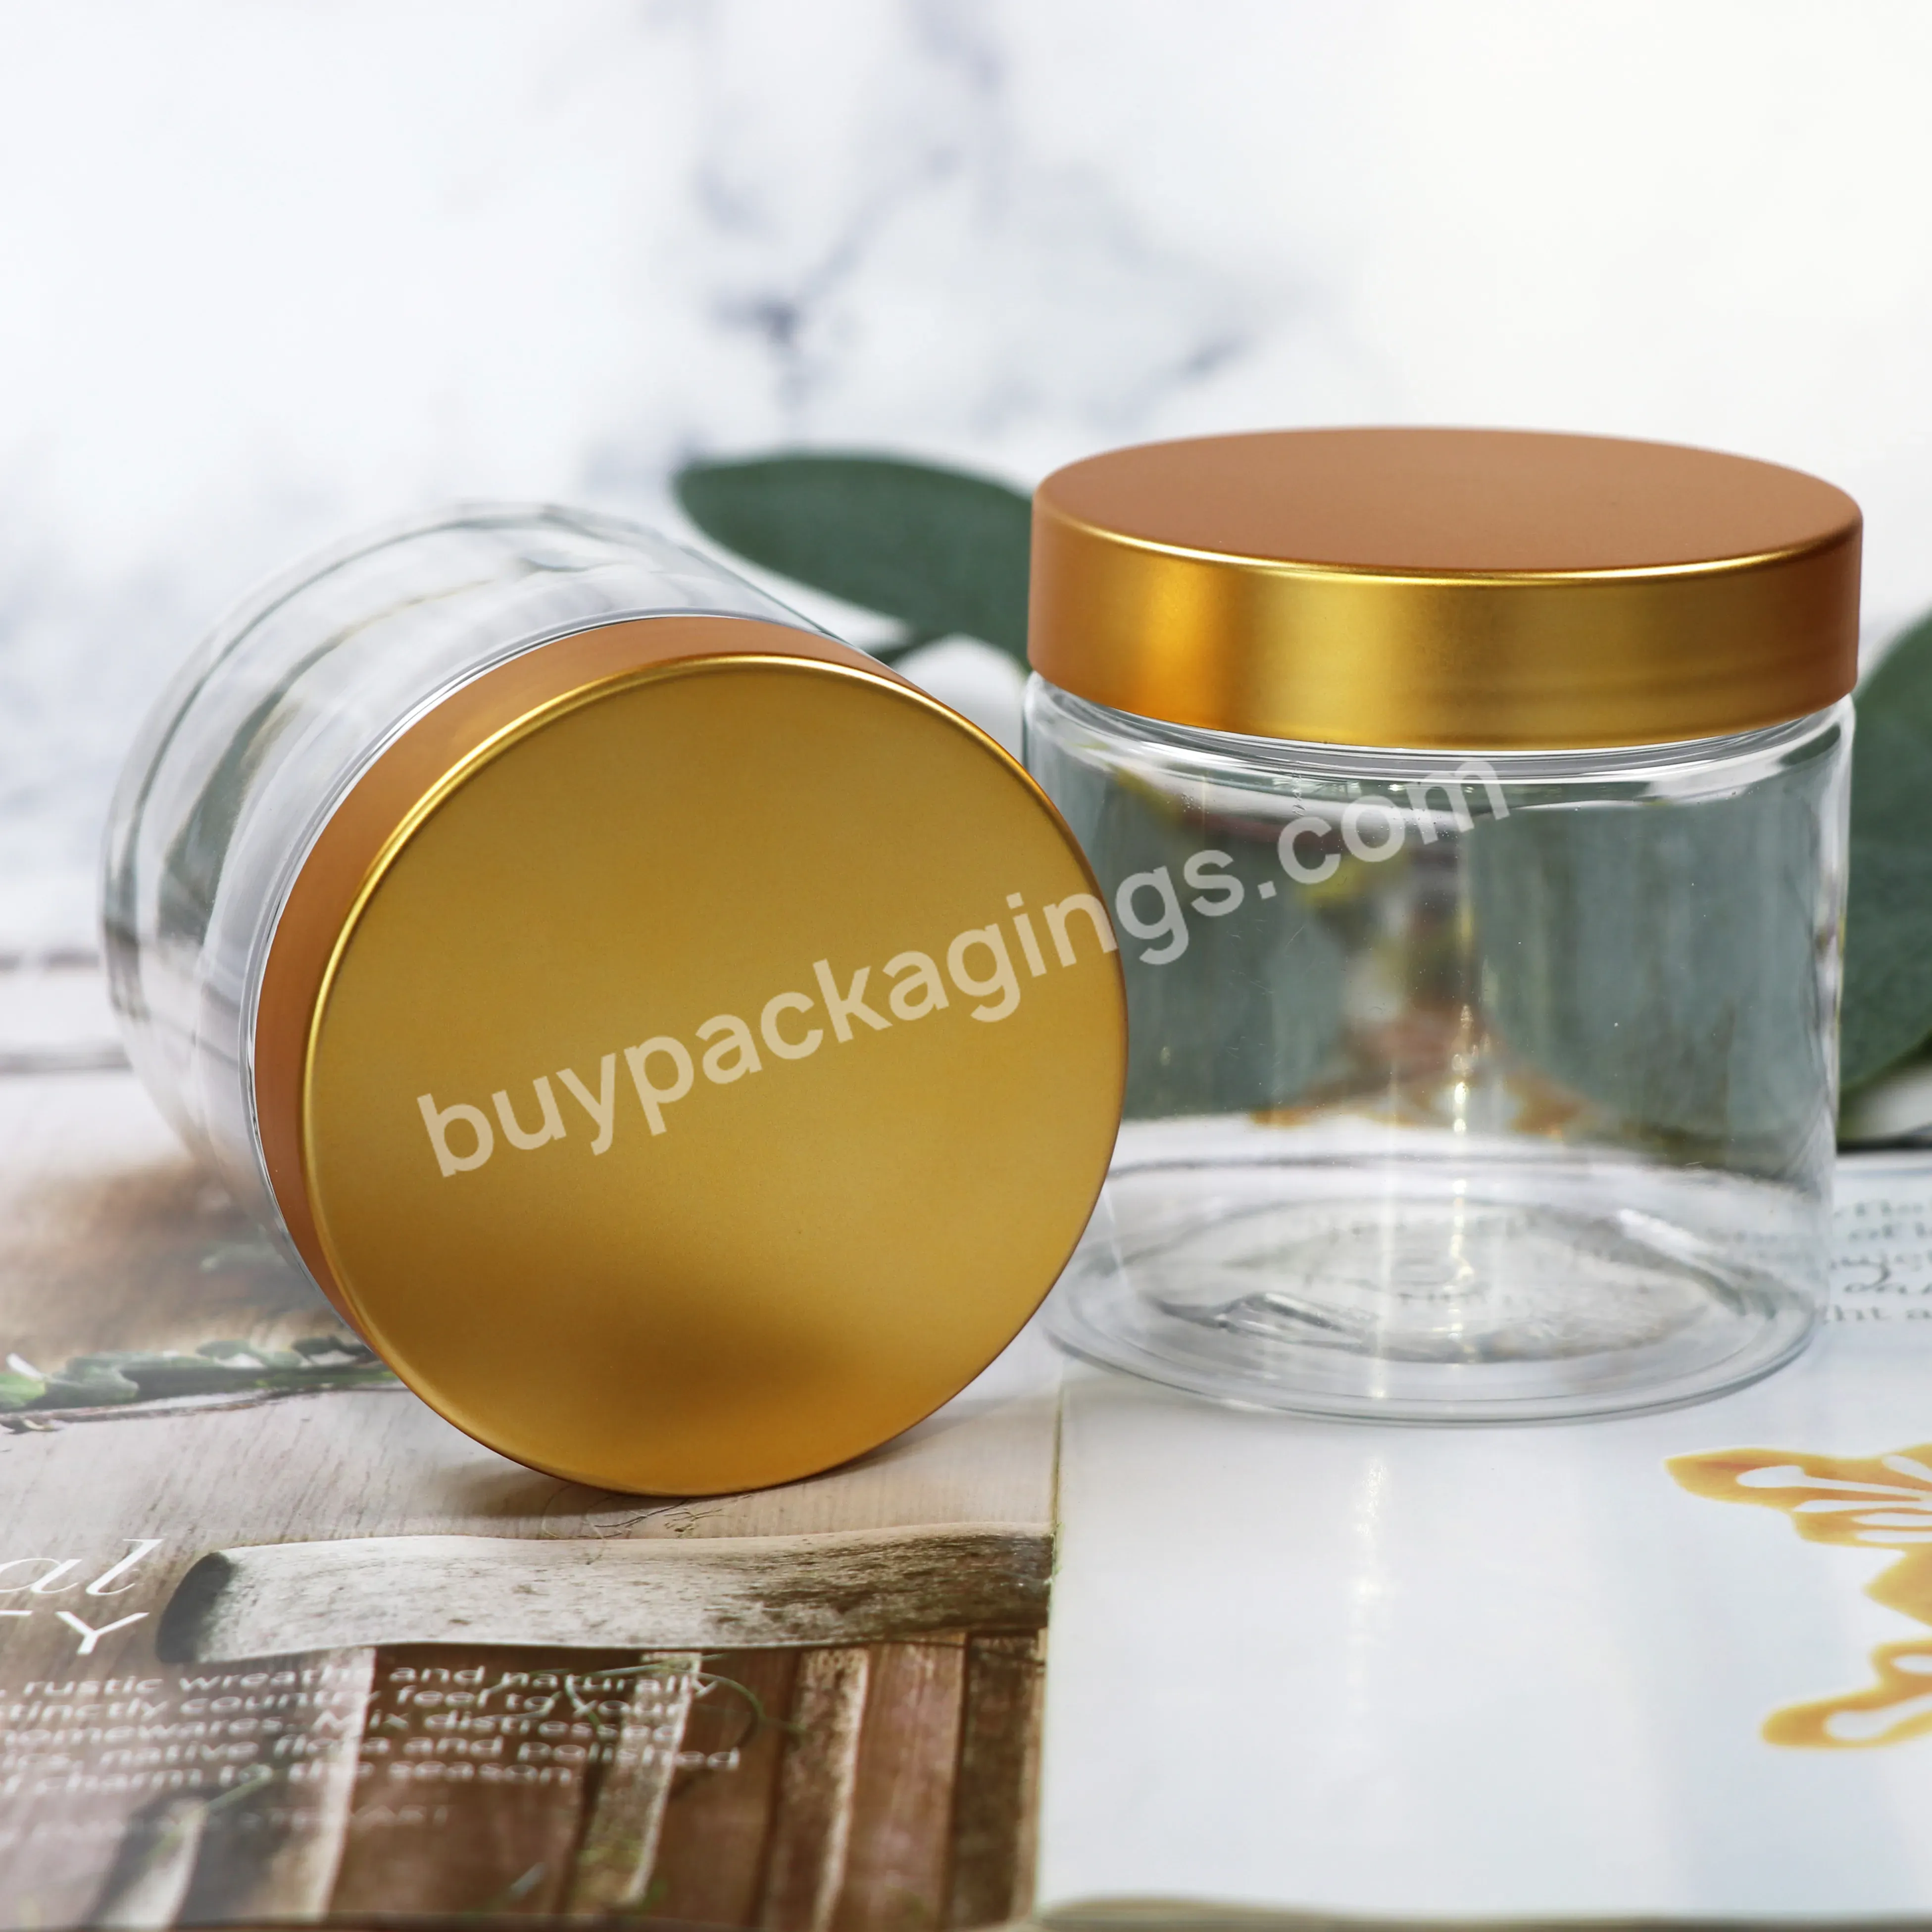 200g Plastic Pet Transparent Color Cosmetic Jar With Shiny Gold Lids /great Container For Body Butter Cream Lotion Stash - Buy Pet Jars With Lids,200g Pet Clear Jars With Gold Screw Lids,Plastic Pet Jars With Lids.